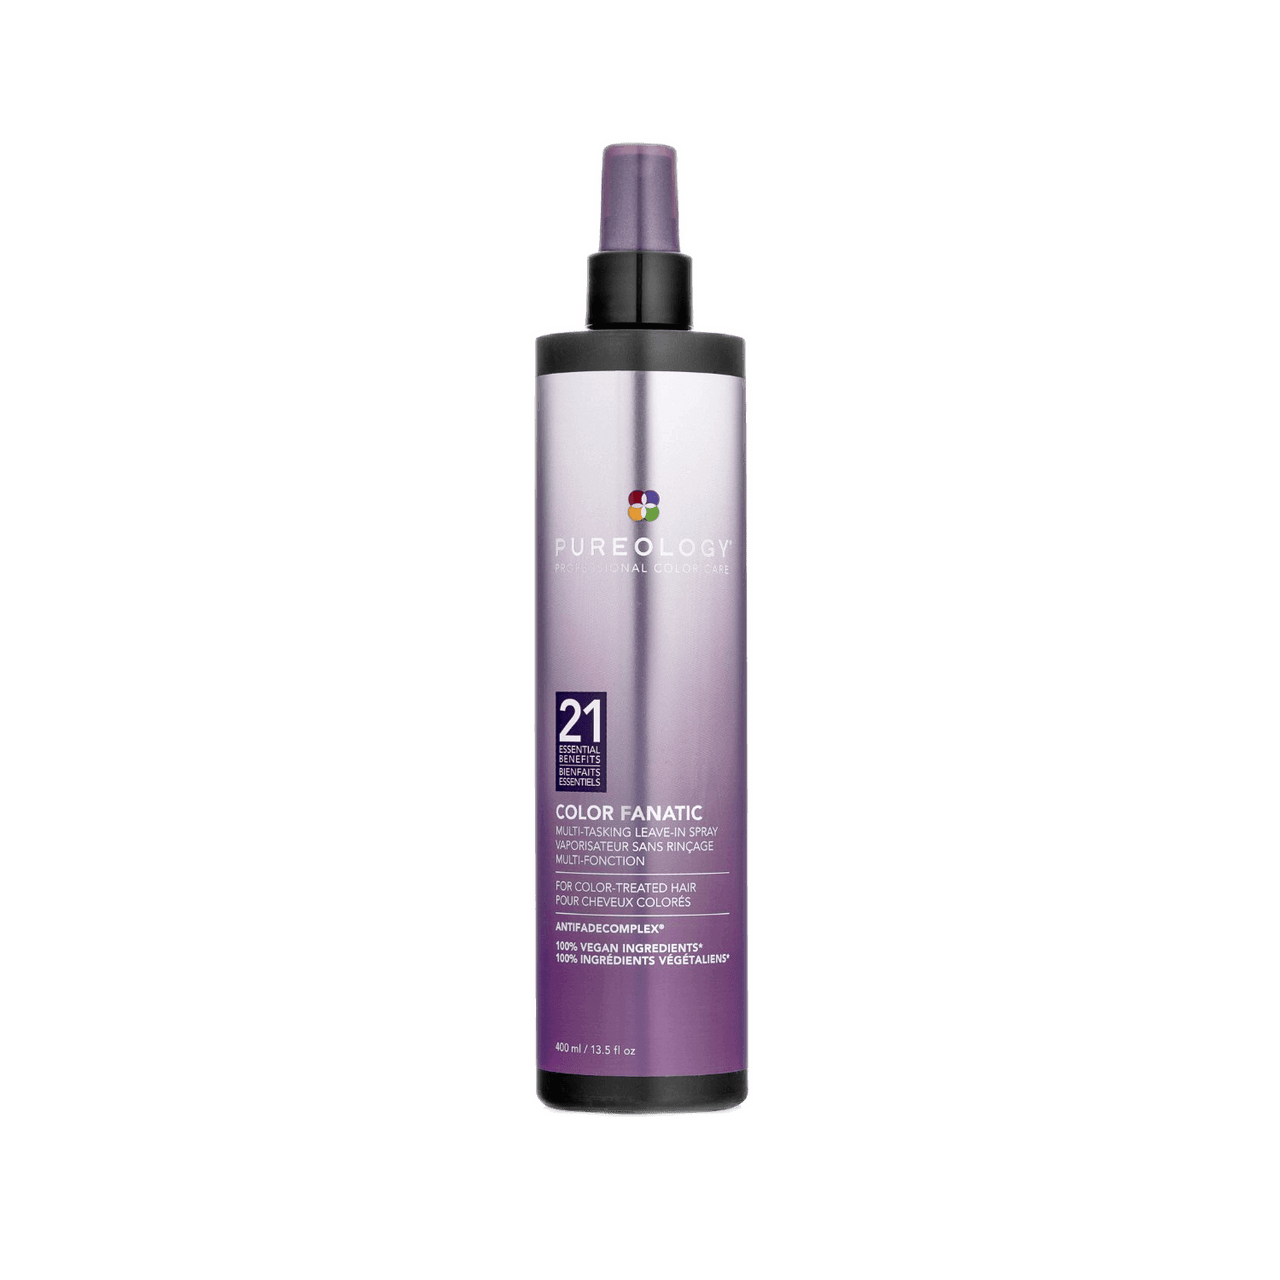 Pureology Color Fanatic Multi-Tasking Leave-In Spray 400mL